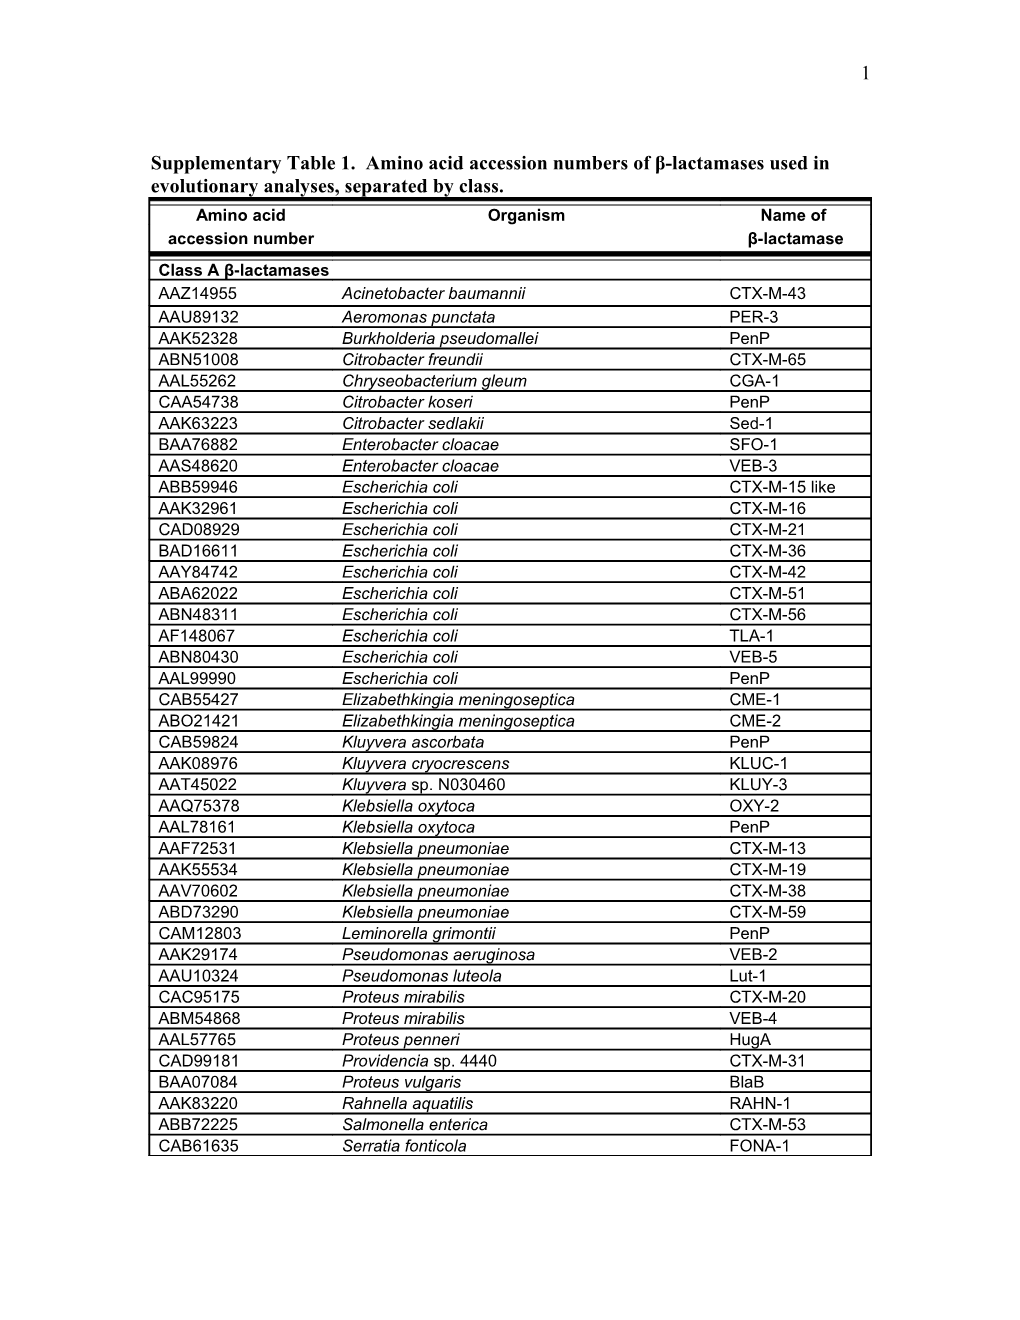 Supplementary Table 1. Amino Acid Accession Numbers of Β-Lactamases Used in Evolutionary